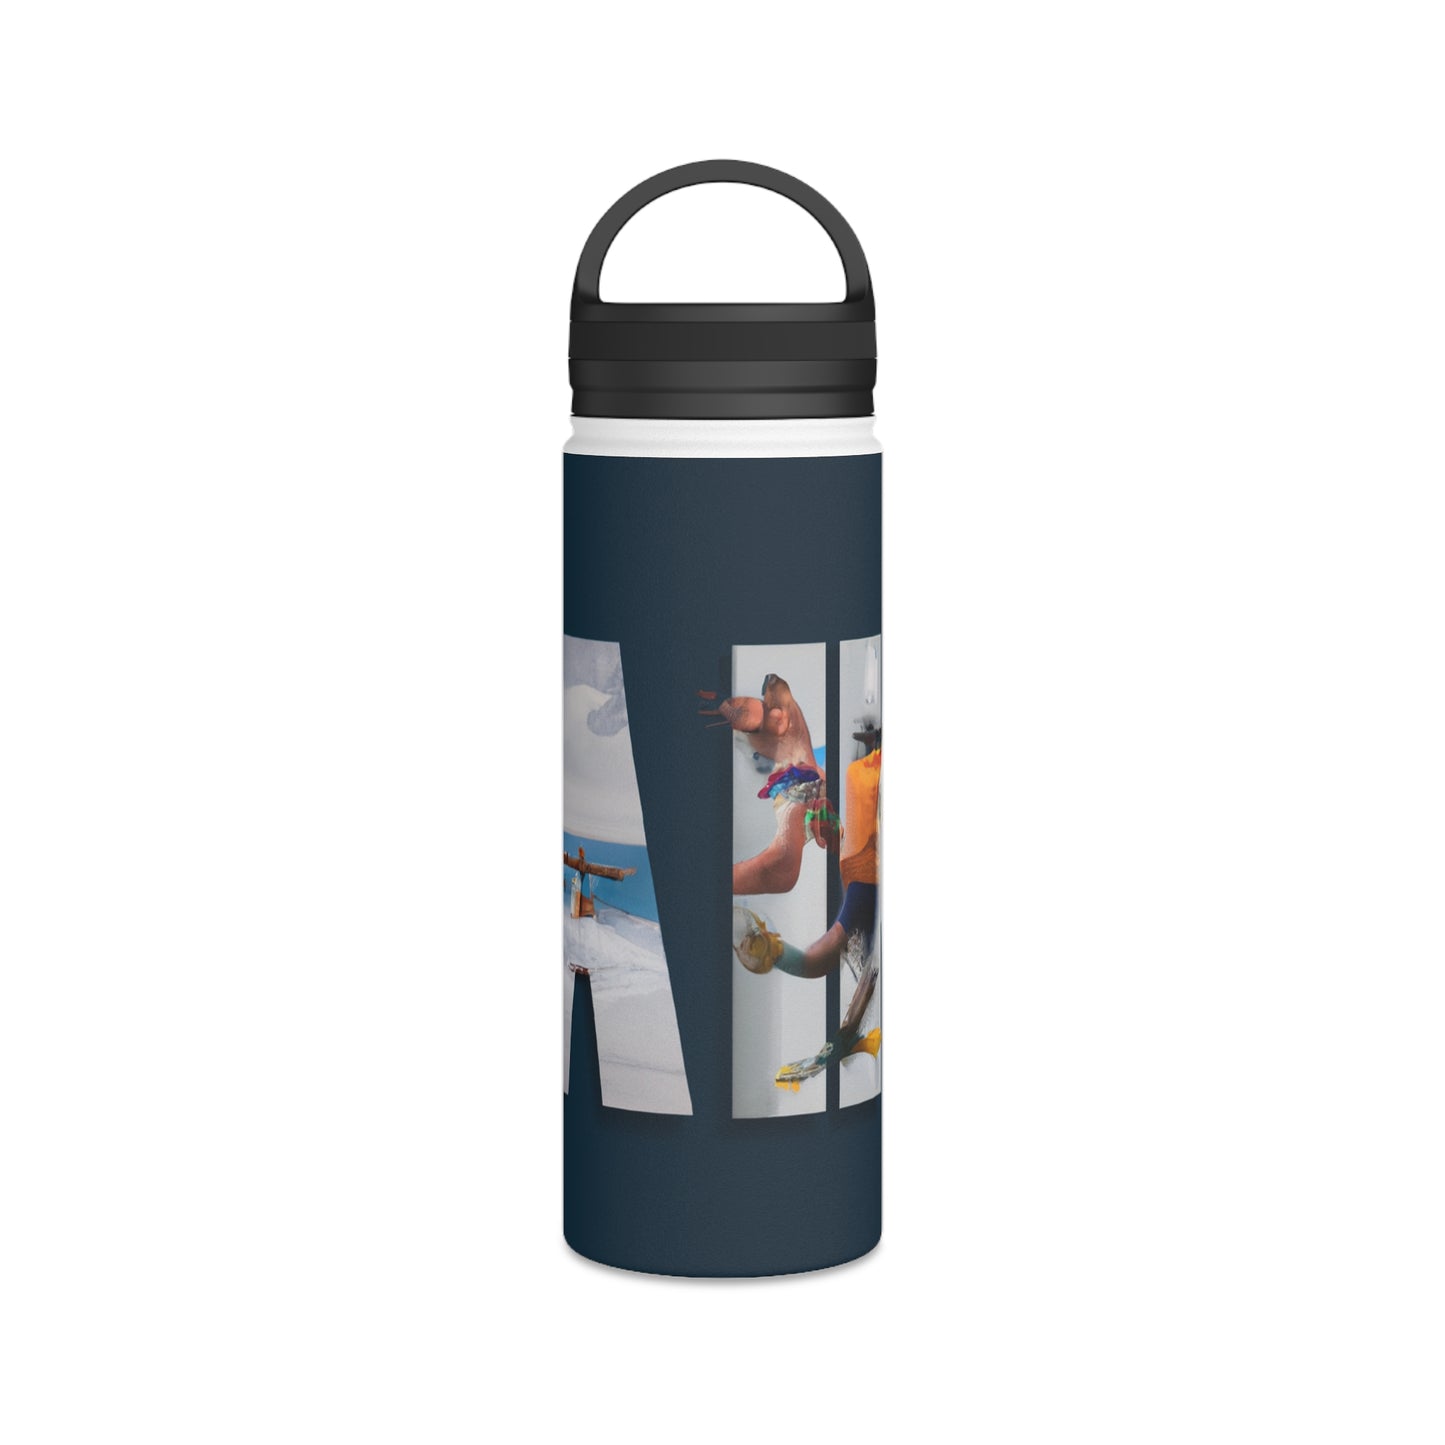 Unleashed: A Mixed Media Symphonic Story of Sports, Art, and Imagery - Go Plus Stainless Steel Water Bottle, Handle Lid